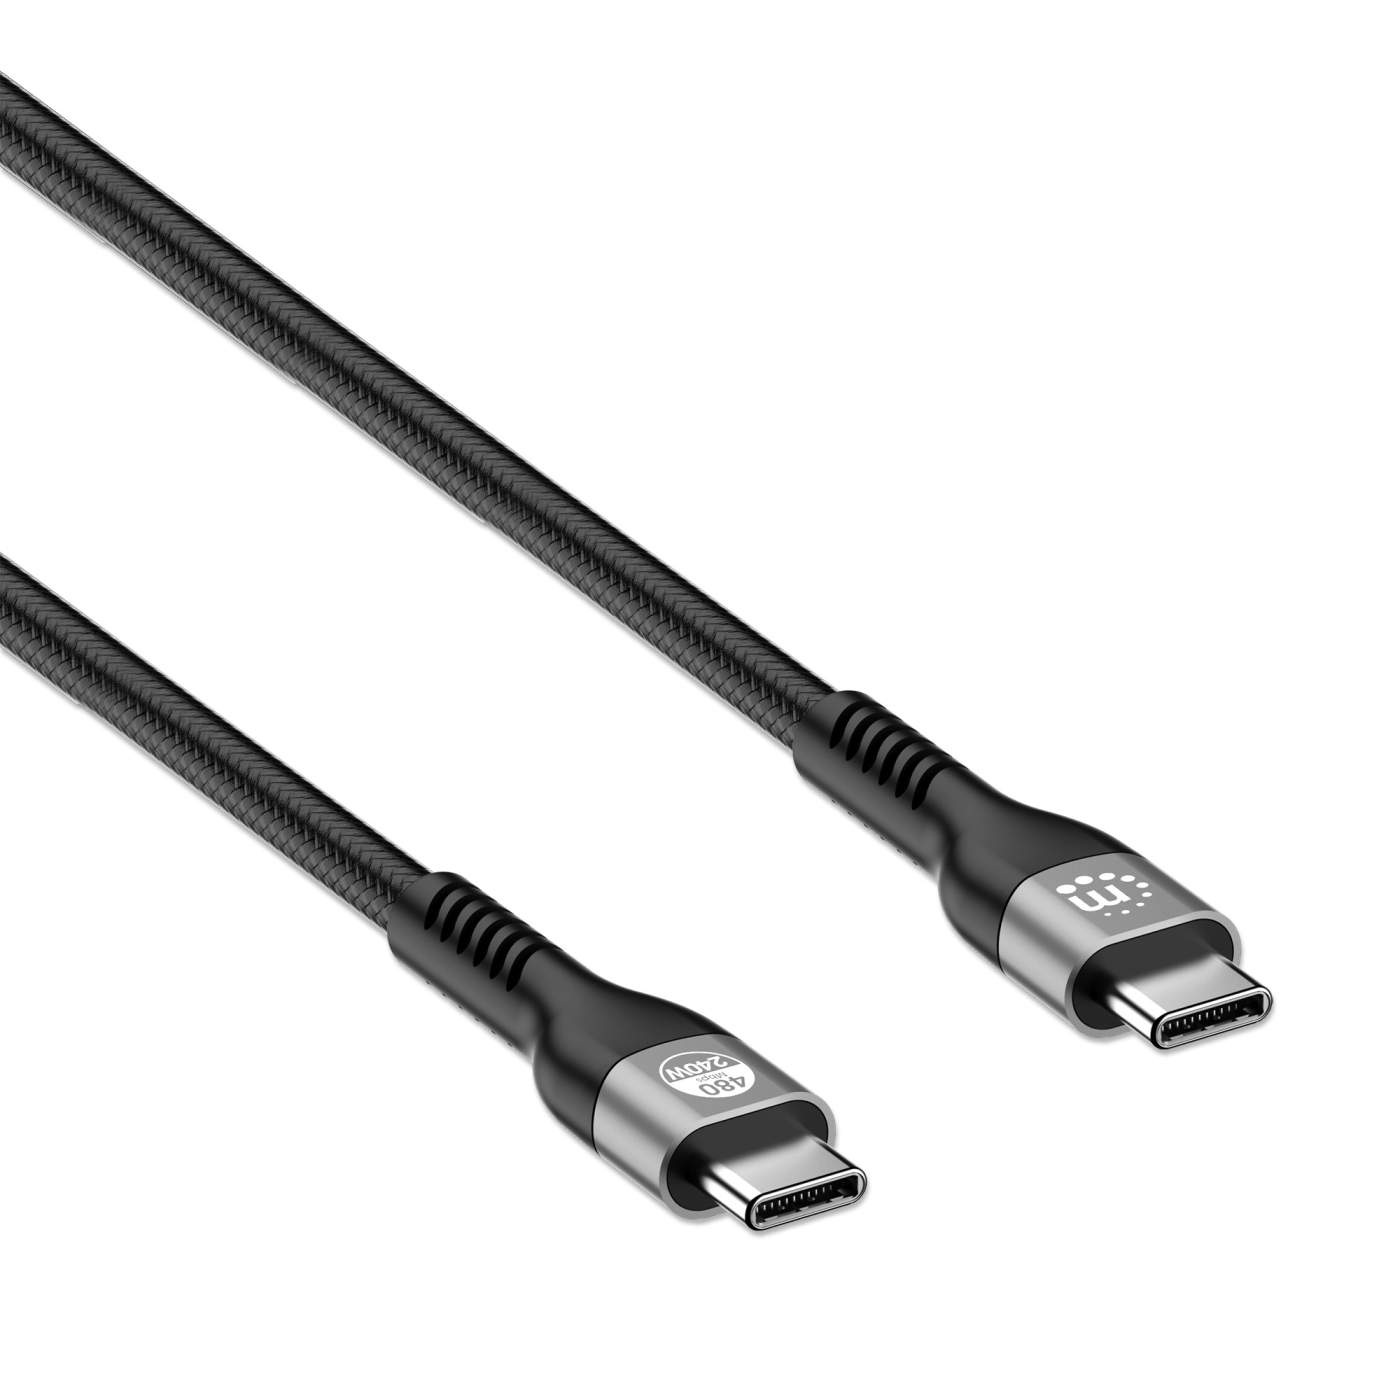 Apogee Electronics USB Type-C Cable for One, 2M MINI-B TO USB-C